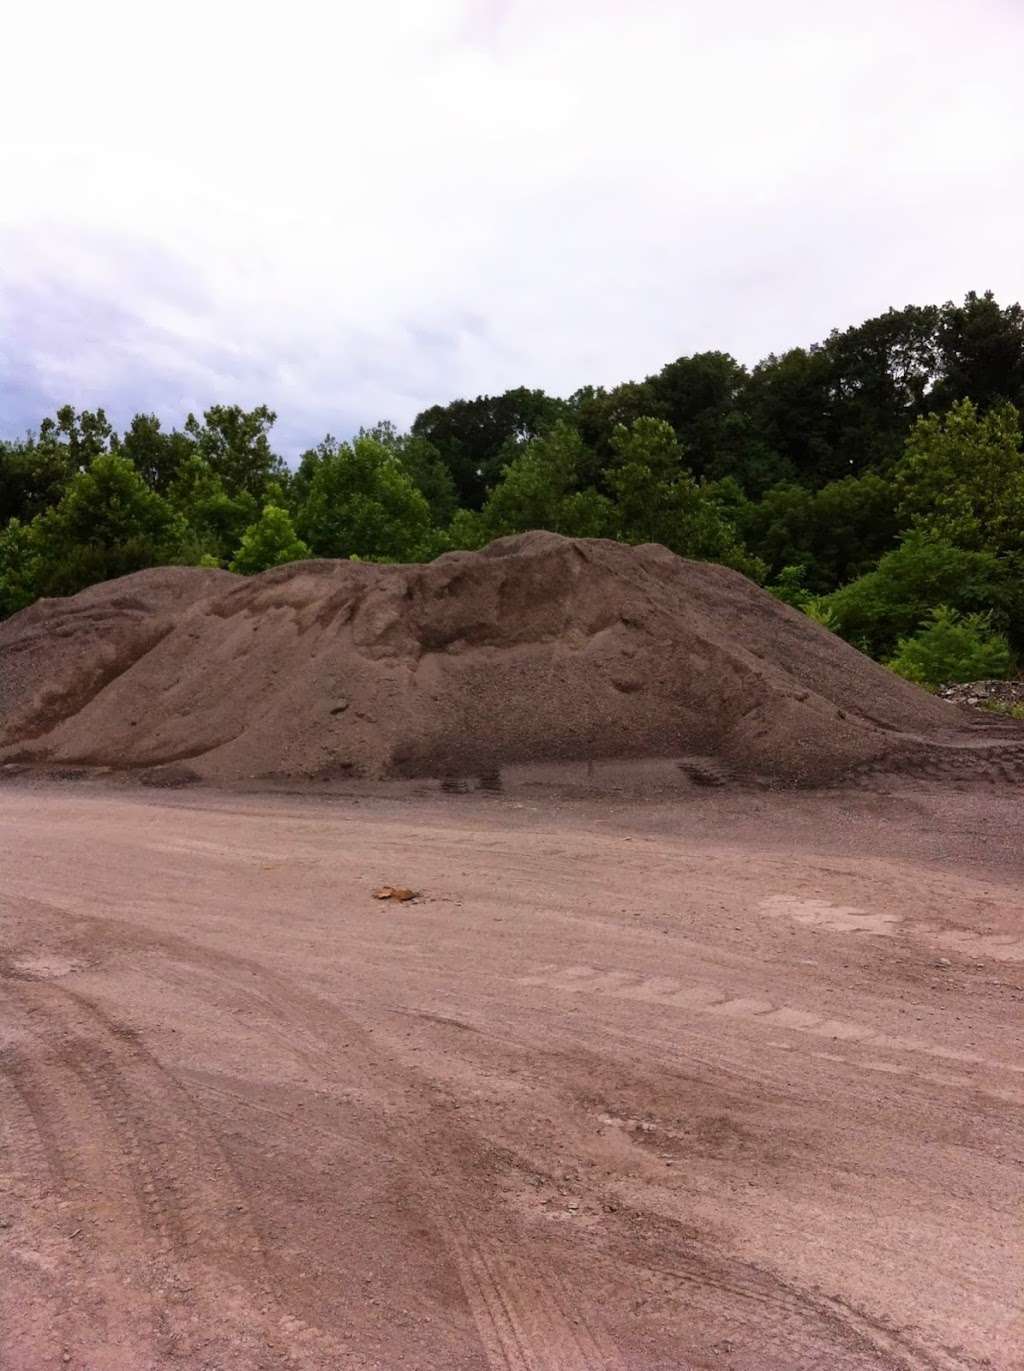 Total Recycling Quarry: Crushed Concrete Blacktop Millings Slag  | 1820 N Dauphin St, Allentown, PA 18109 | Phone: (610) 266-0907